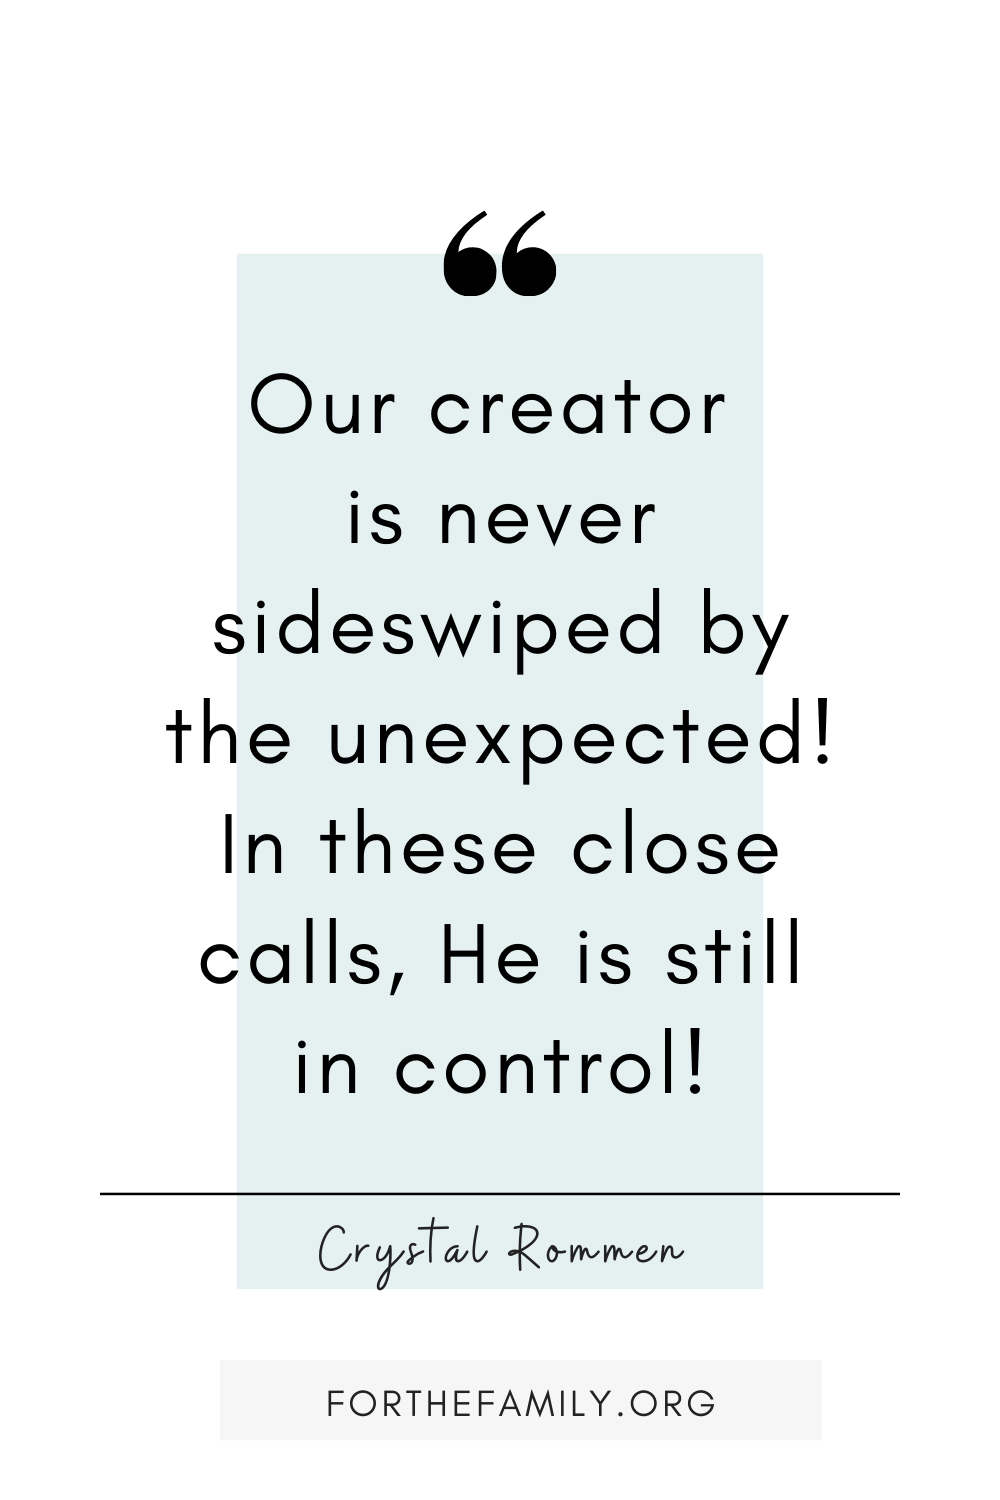 Our creator is never sideswiped by the unexpected! In these close calls, He is still in control!